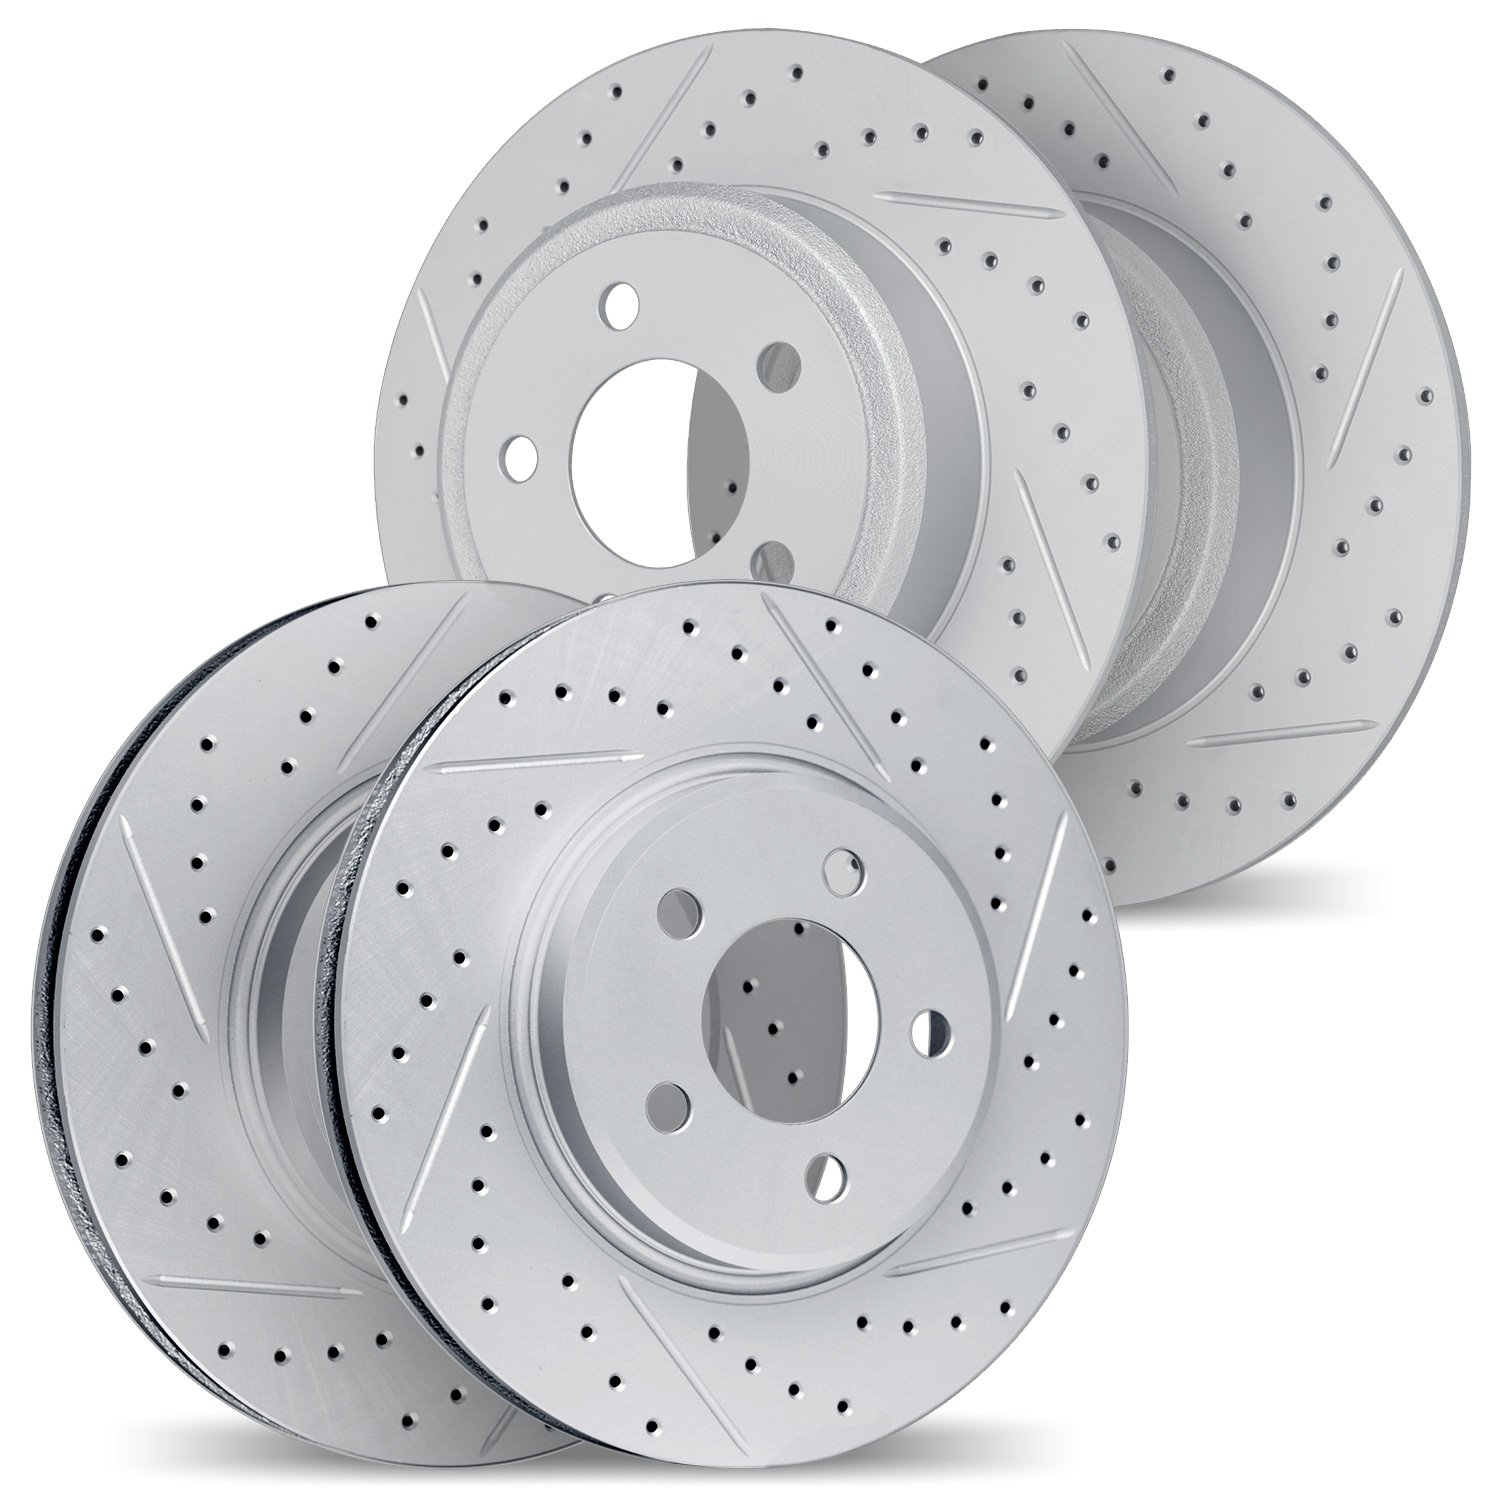 2004-45019 Geoperformance Drilled/Slotted Brake Rotors, 2005-2005 GM, Position: Front and Rear